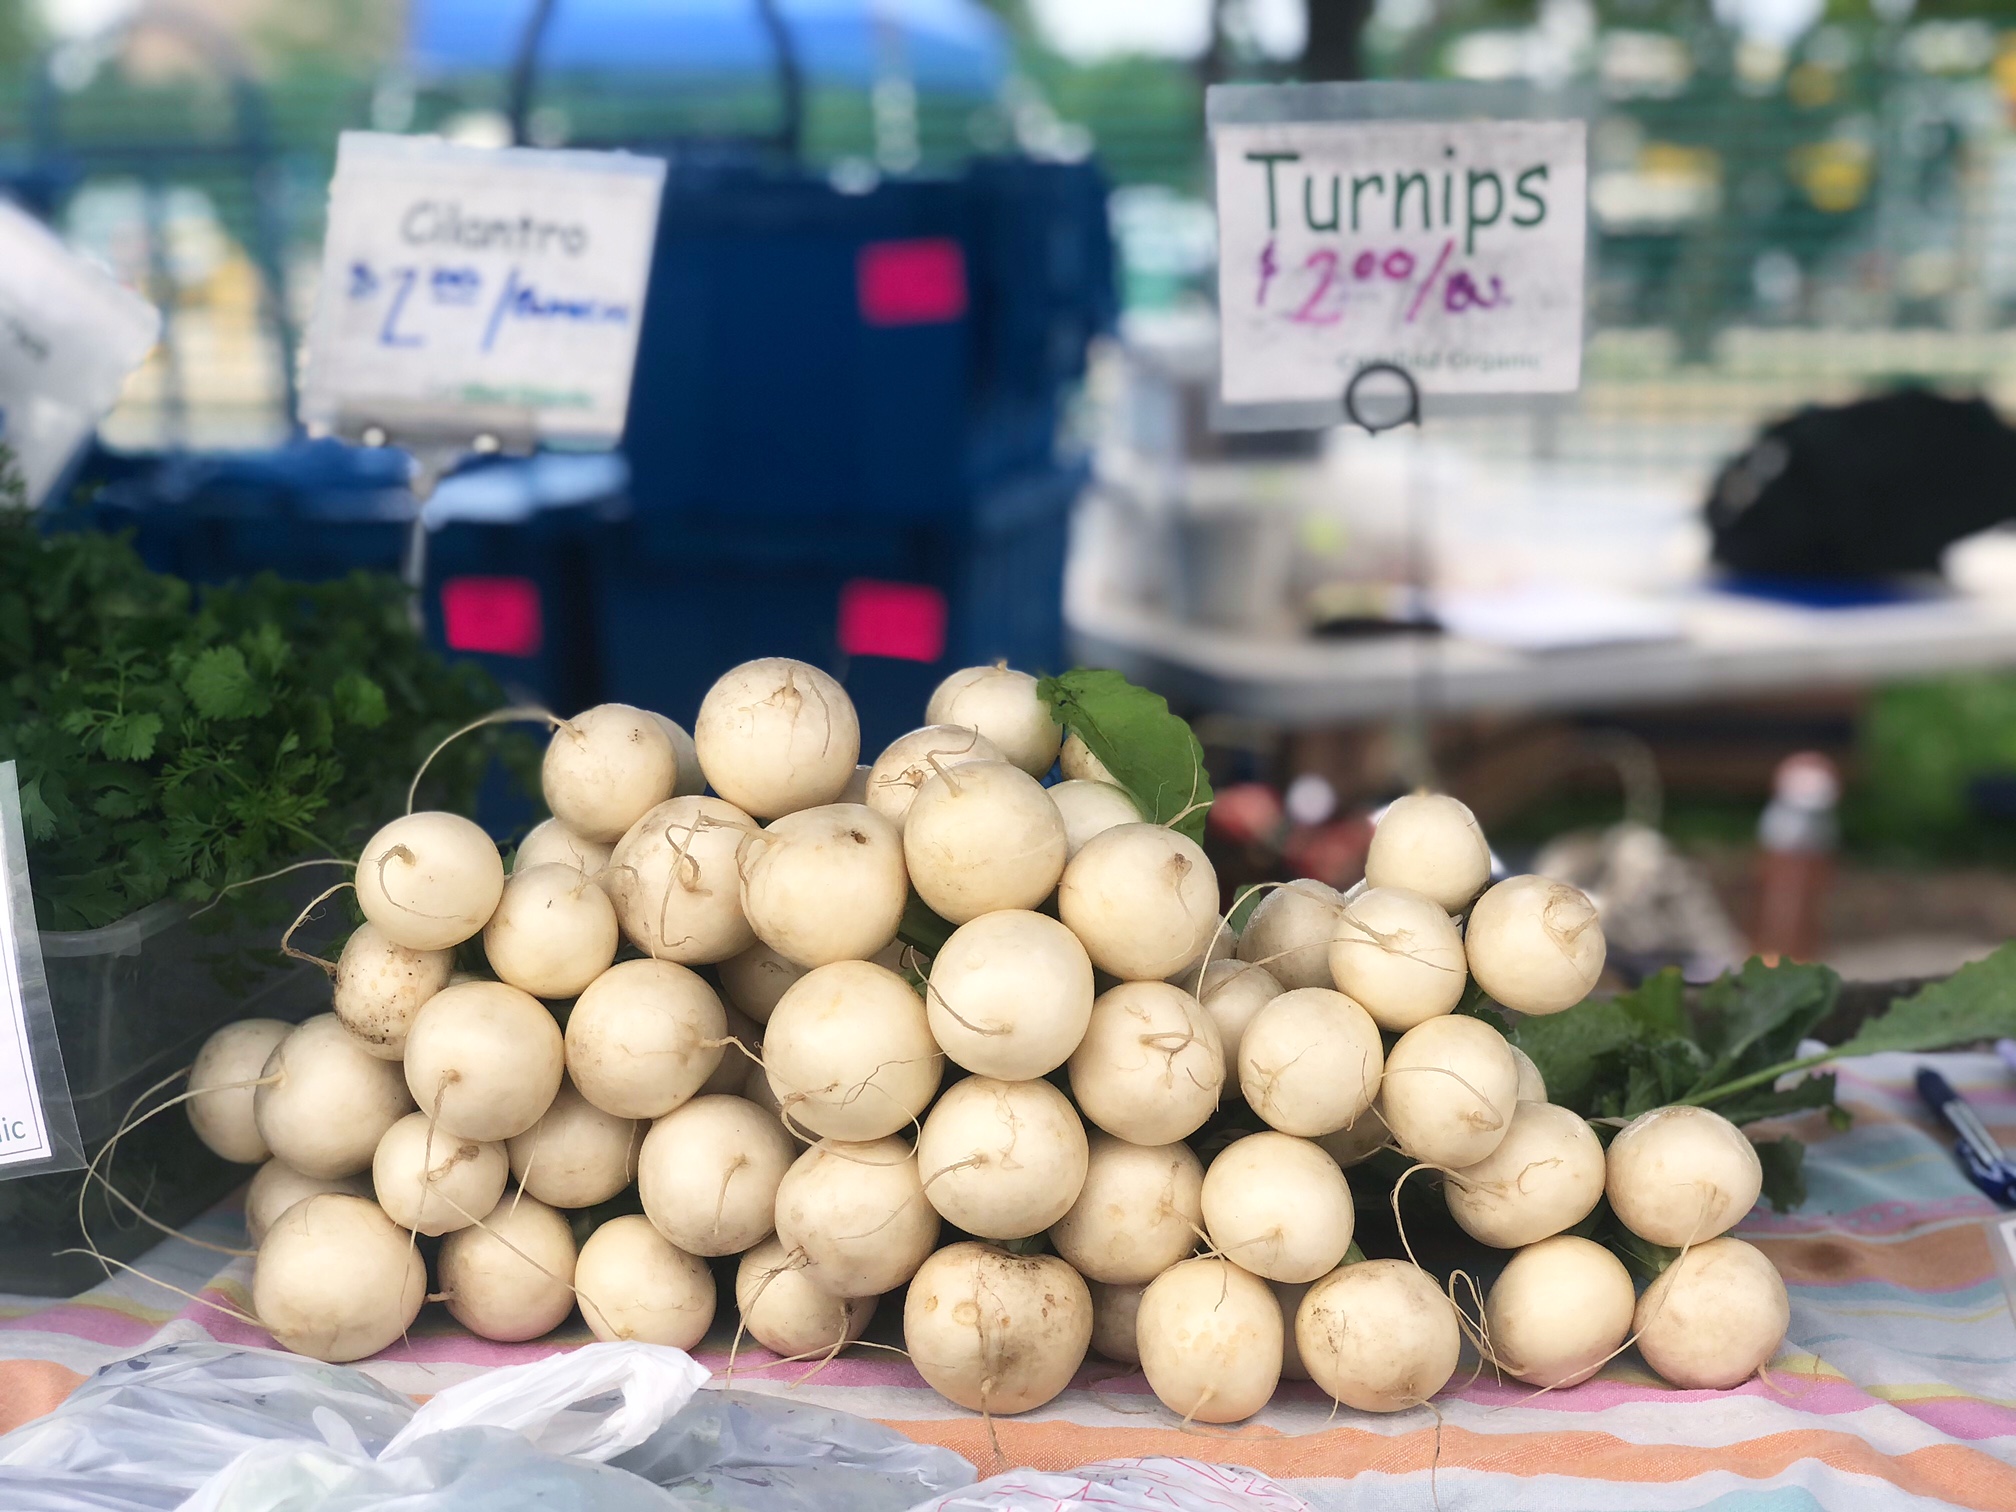 On a table, there is a huge stack of white turnips. Photo by Alyssa Buckley.